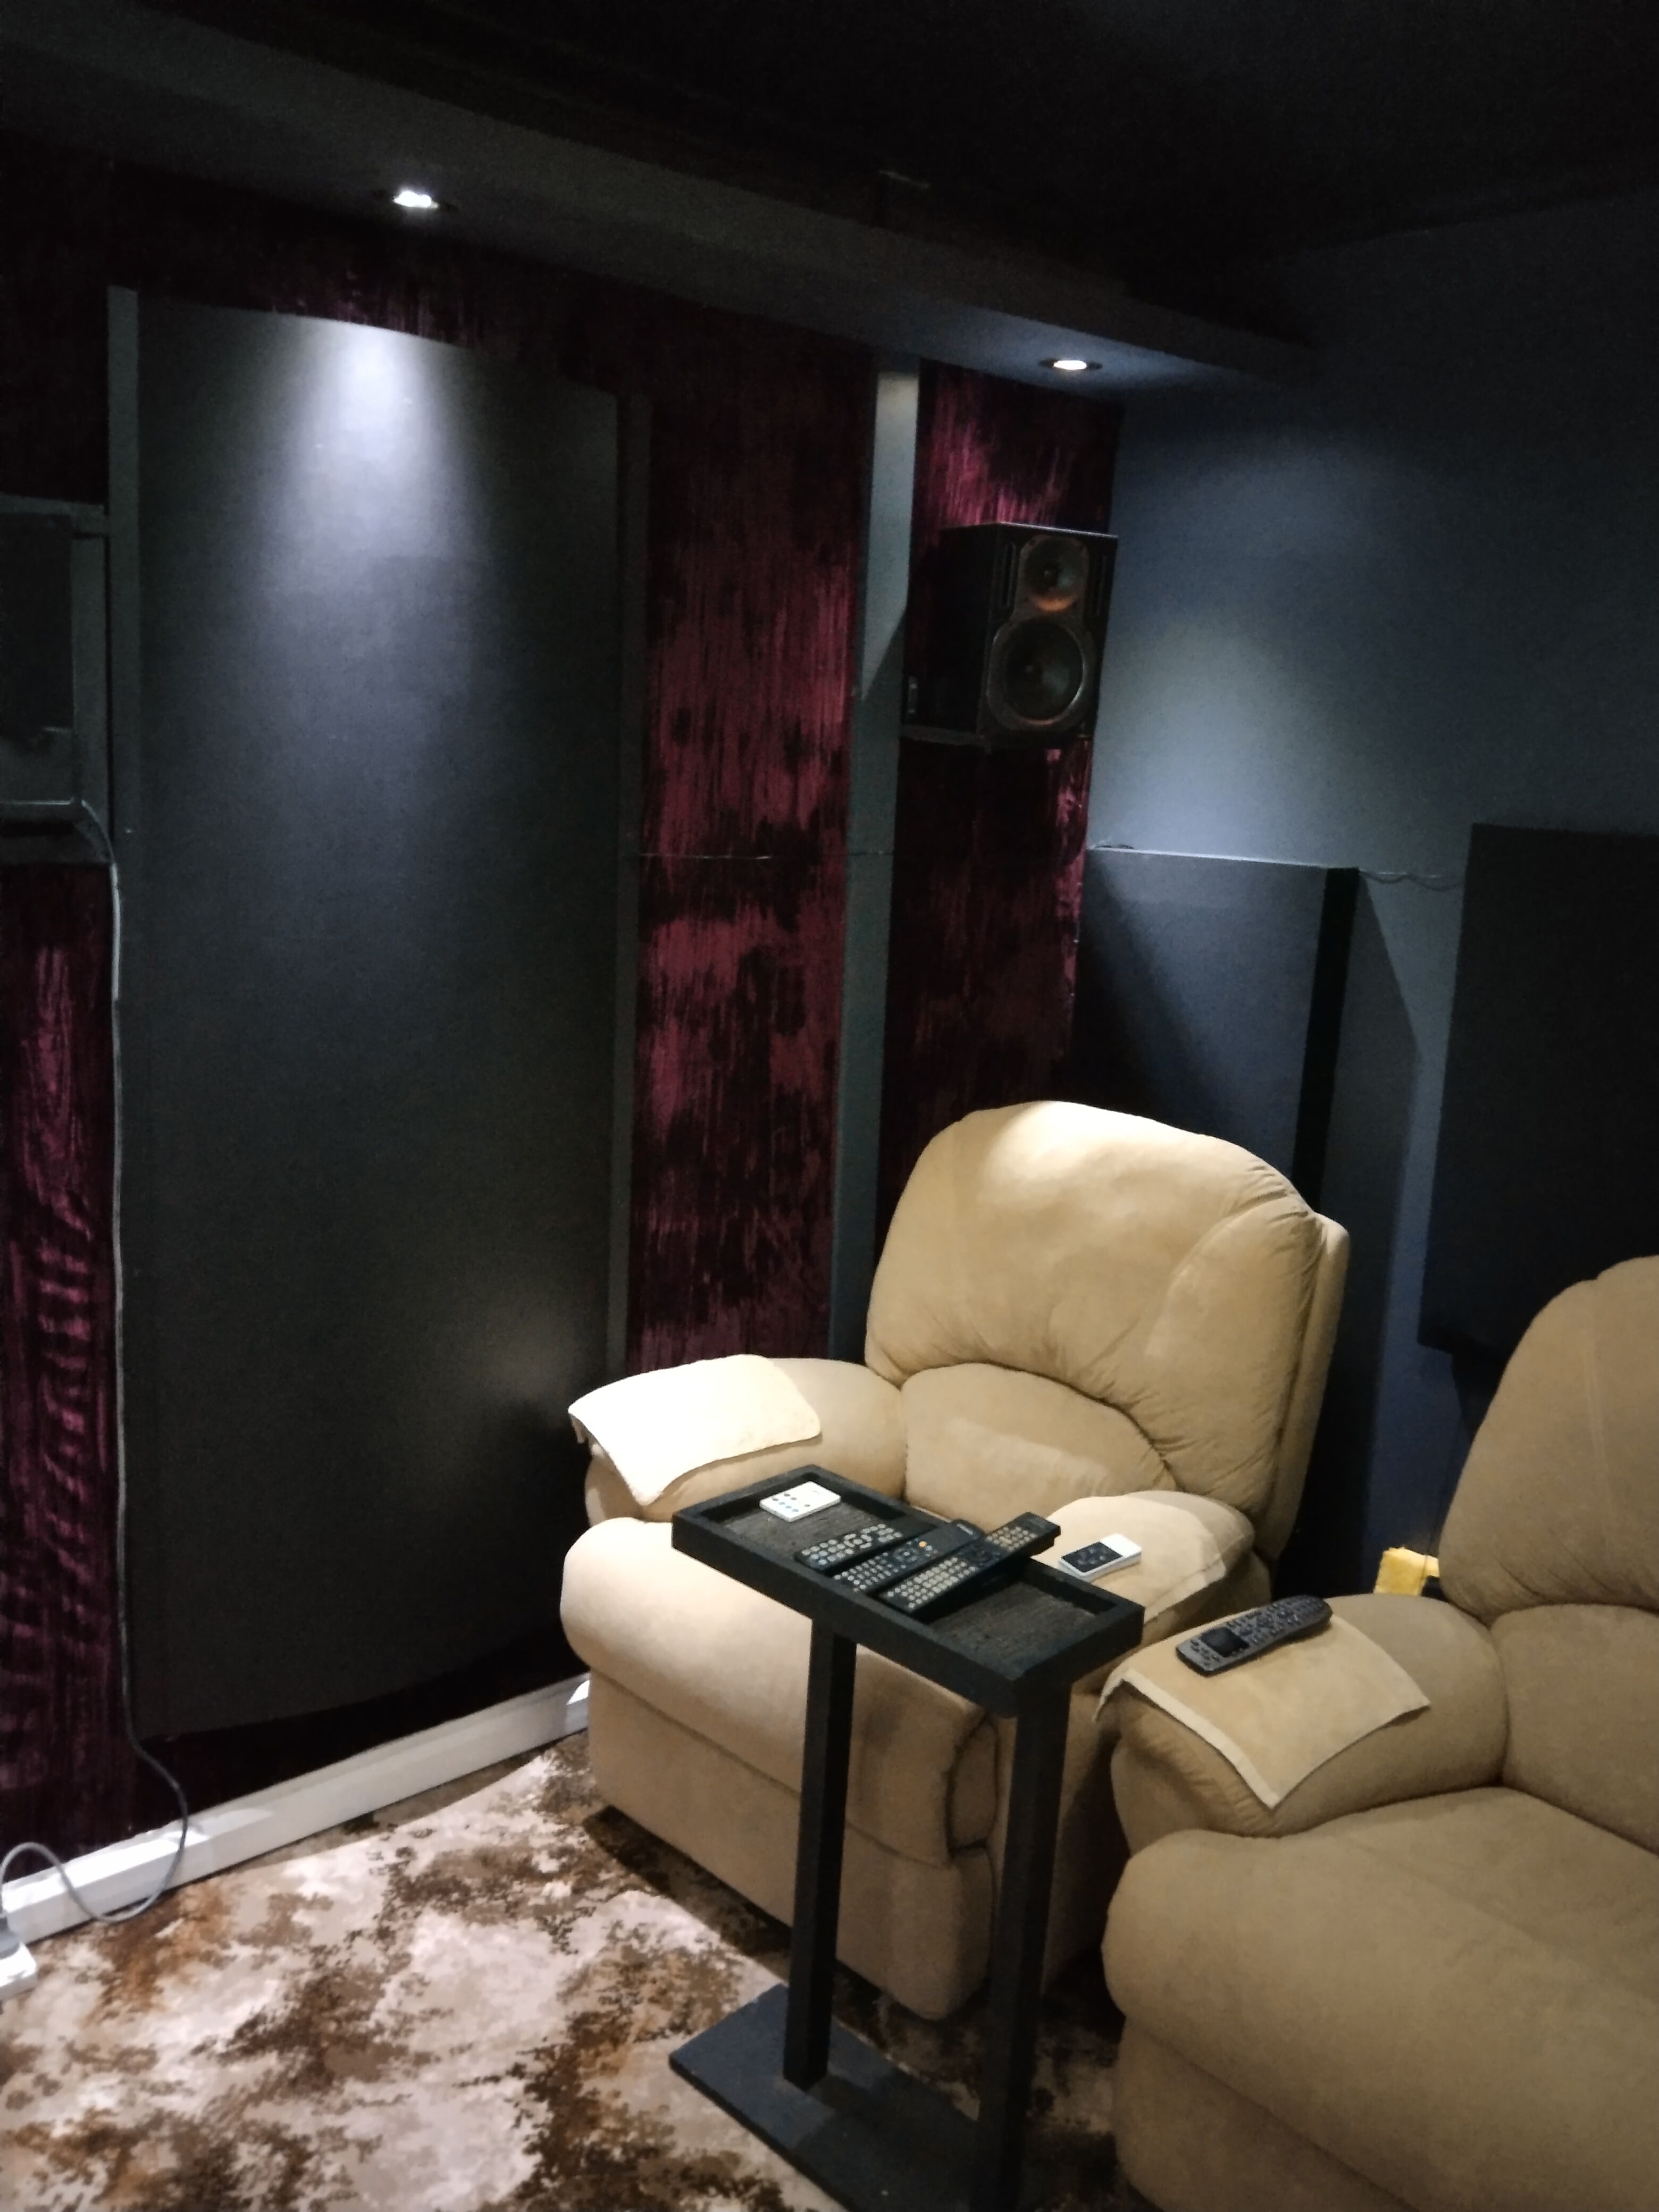 Aussie home theatre rooms: Total upgrade!